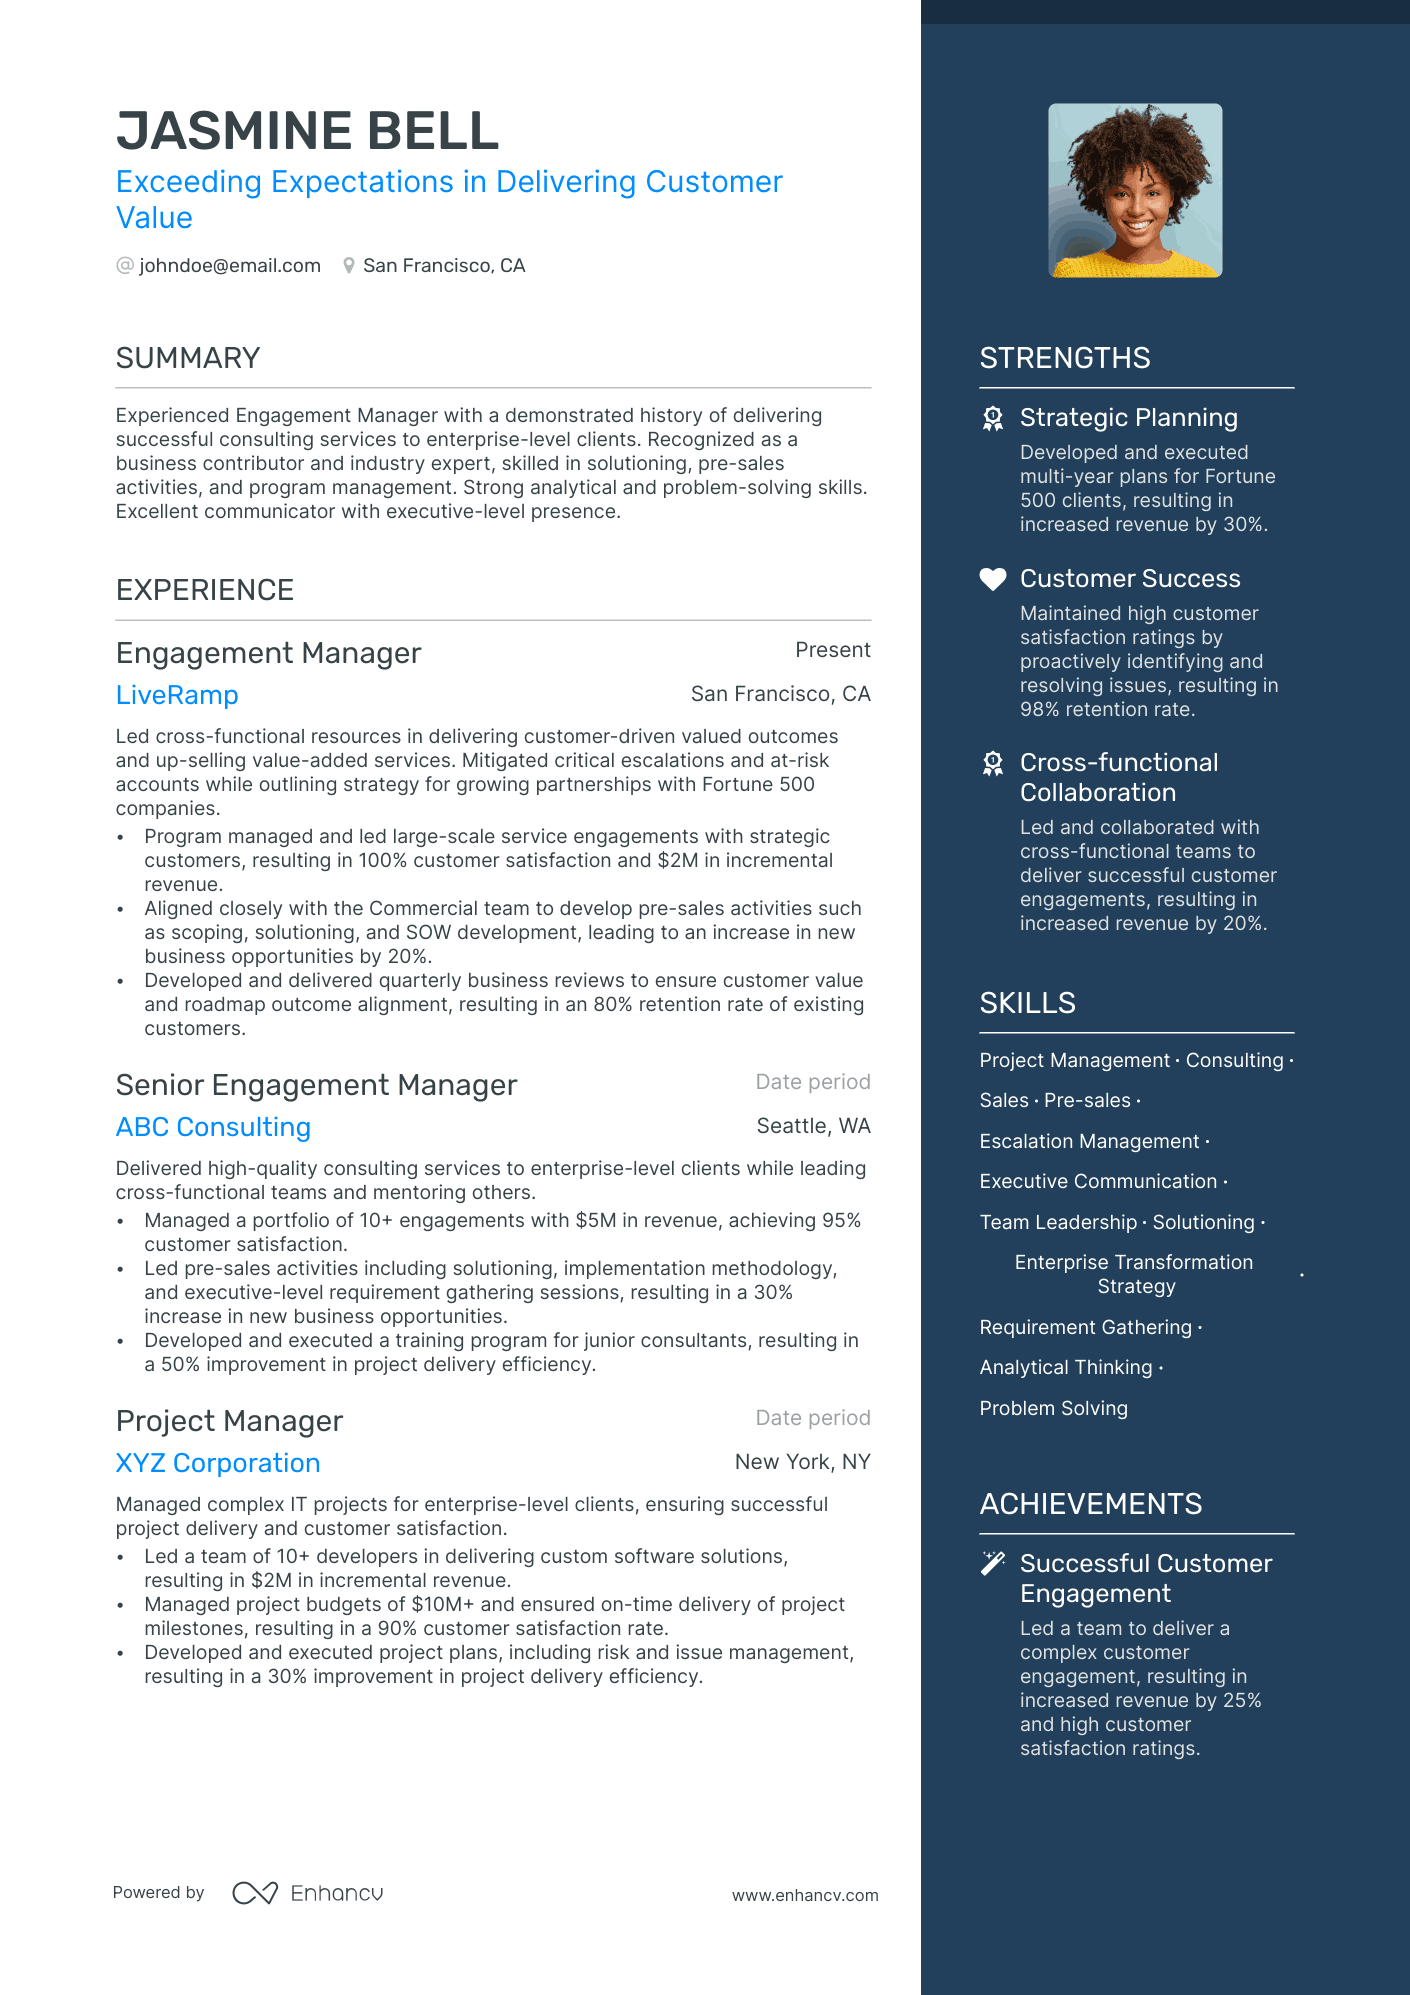 Engagement Manager resume example